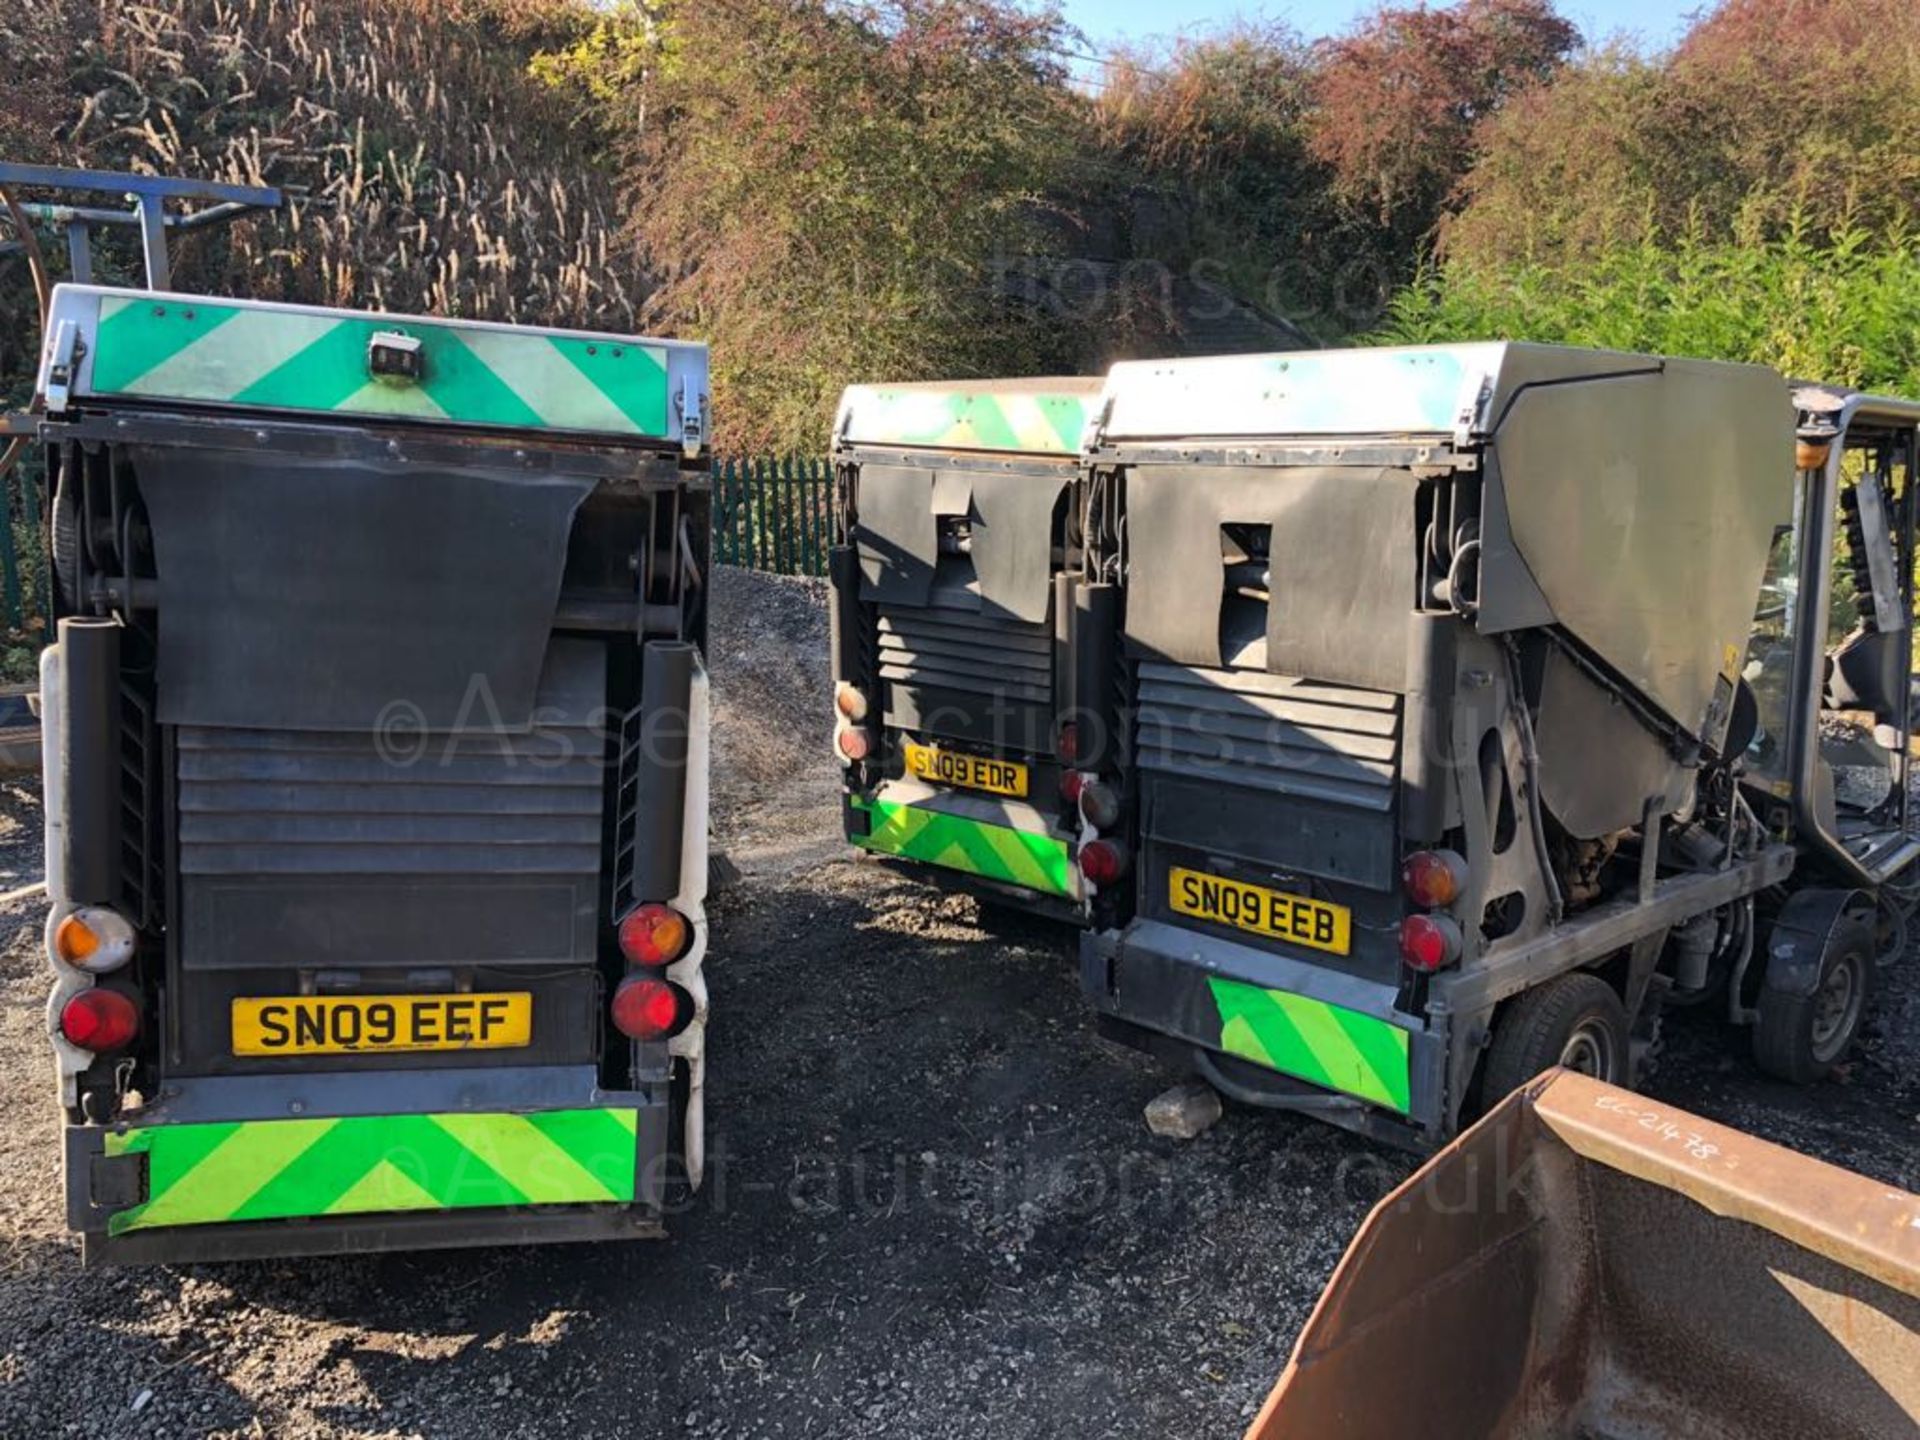 JOB LOT OF 3 X 2009 GREEN MACHINE ROAD SWEEPERS *PLUS VAT* - Image 13 of 19